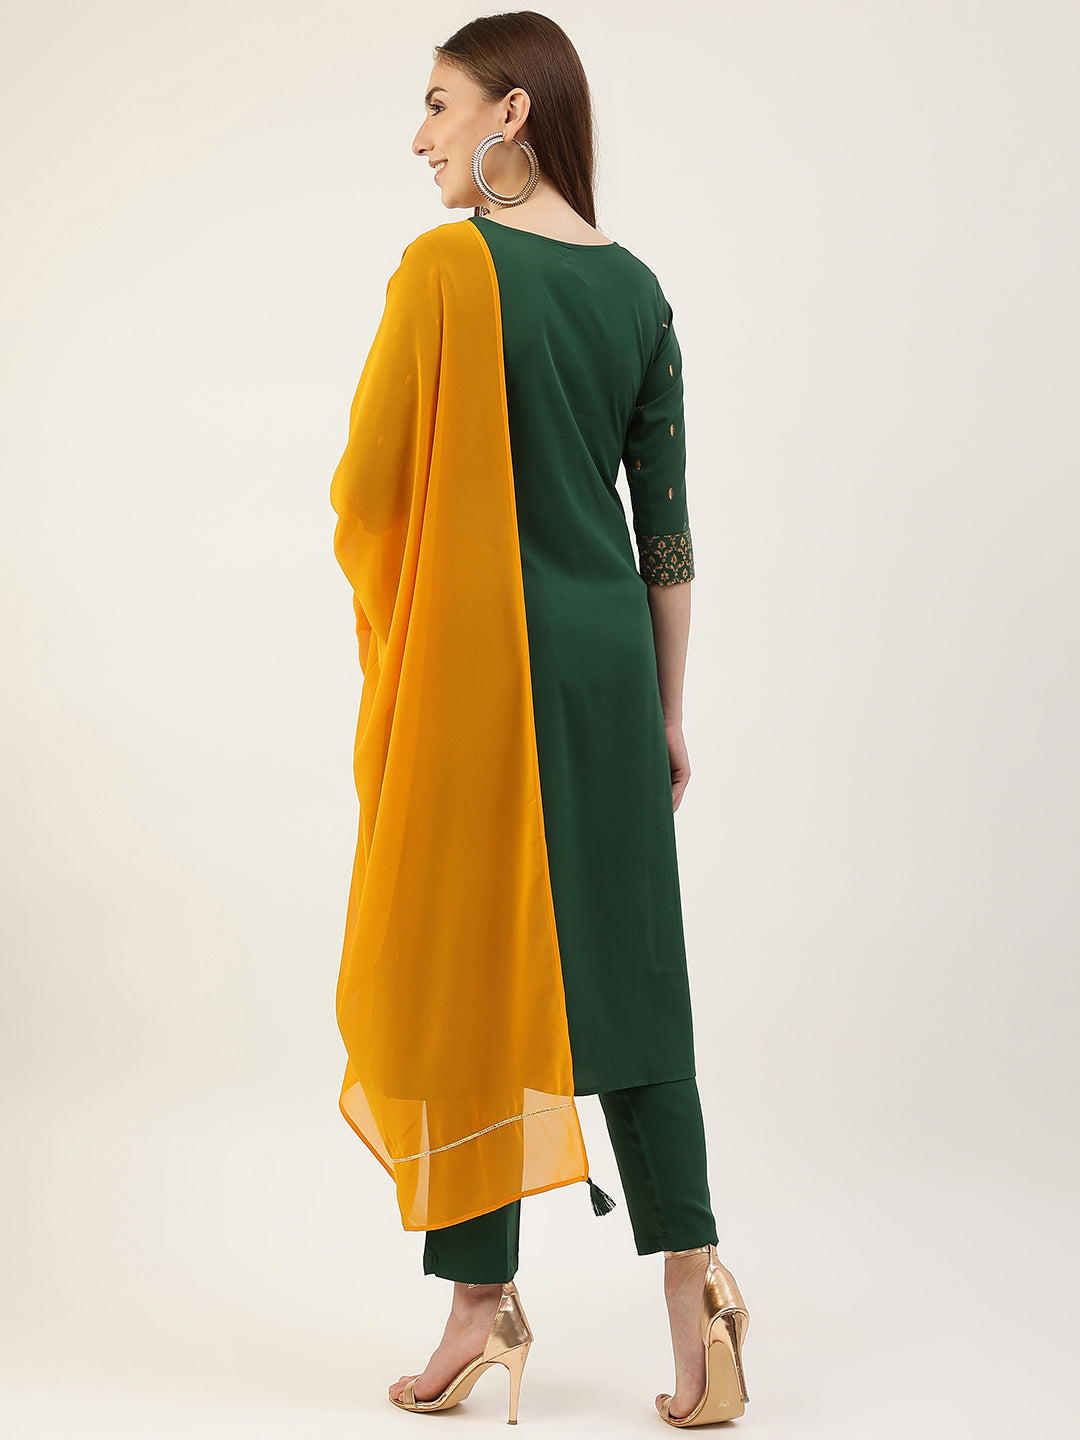 Women's Green Poly Crepe Straight Kurta with Pant and Dupatta